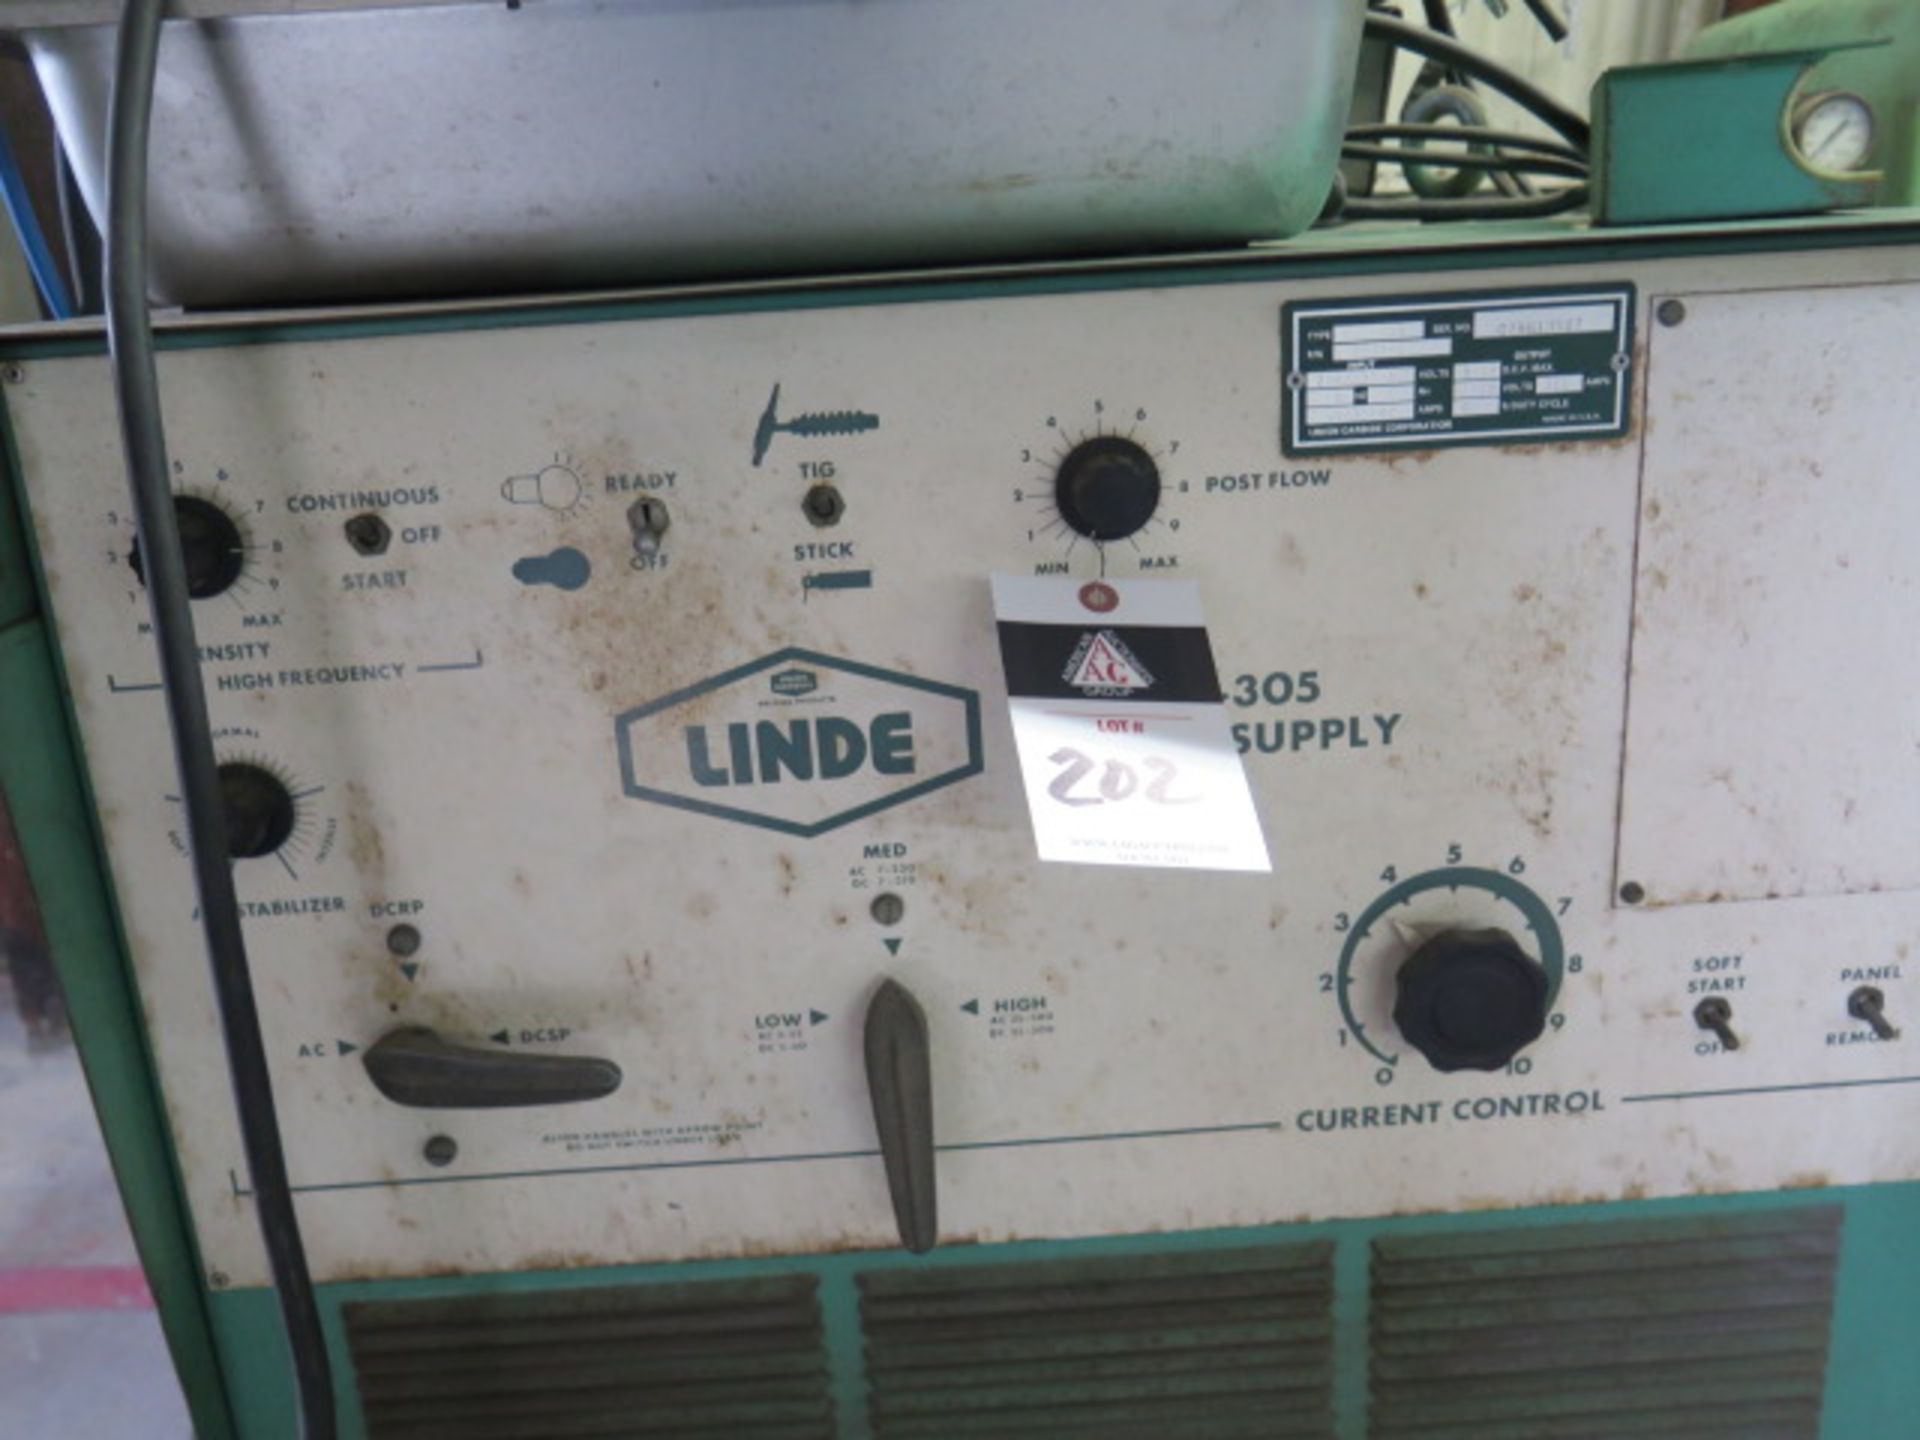 Linde UCC-305 Arc Welding Power Source w/ ITW Cooler (SOLD AS-IS - NO WARRANTY) - Image 7 of 8